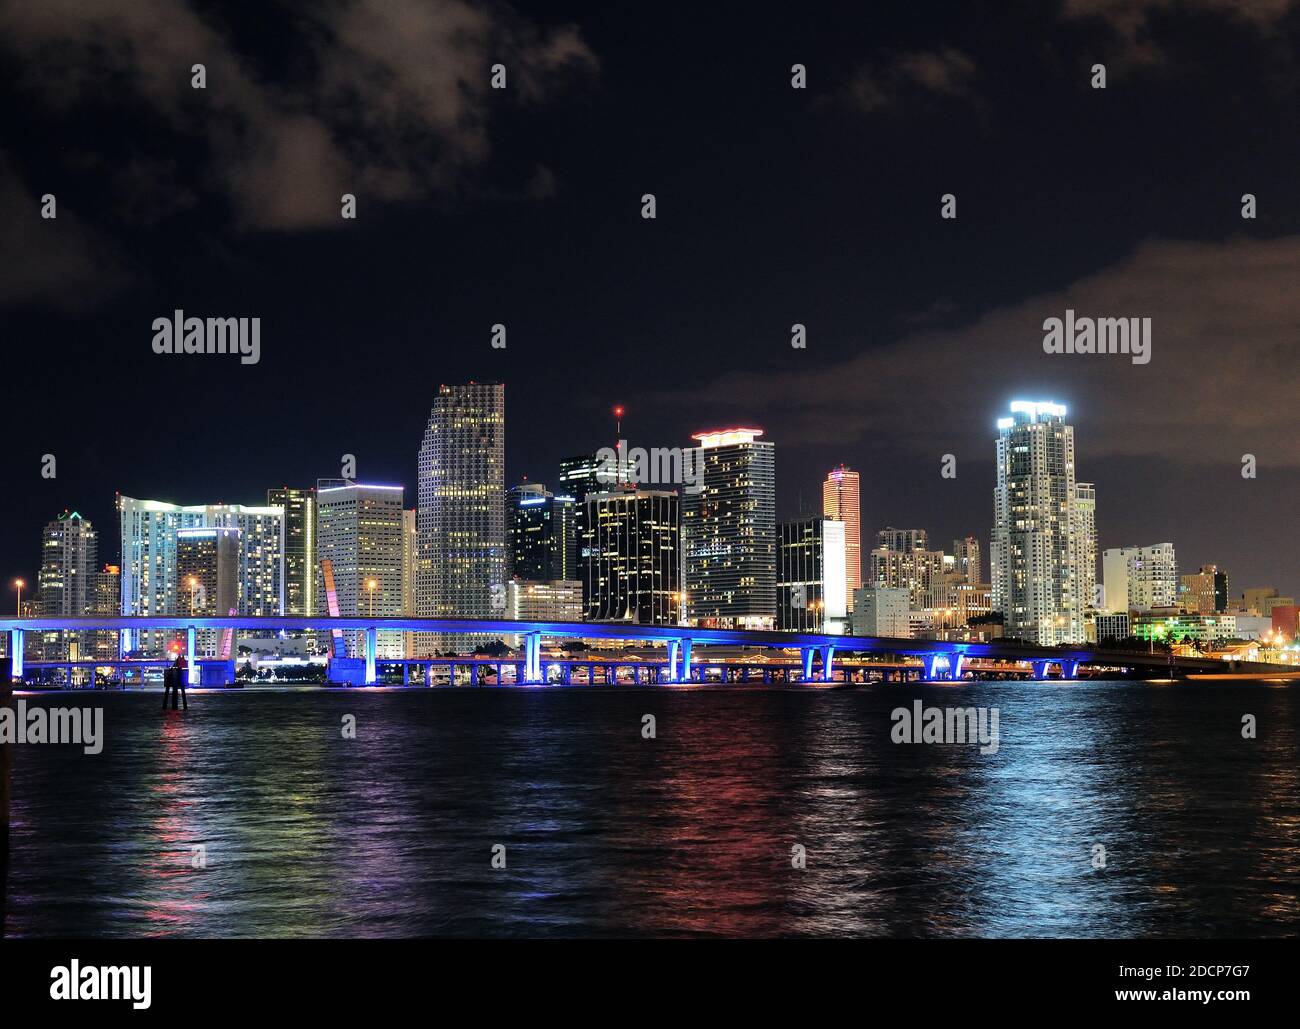 View To The Skyline Of Miami From Watson Island At Night On An Autumn Evening With A Clear Blue Sky And A Few Clouds Stock Photo